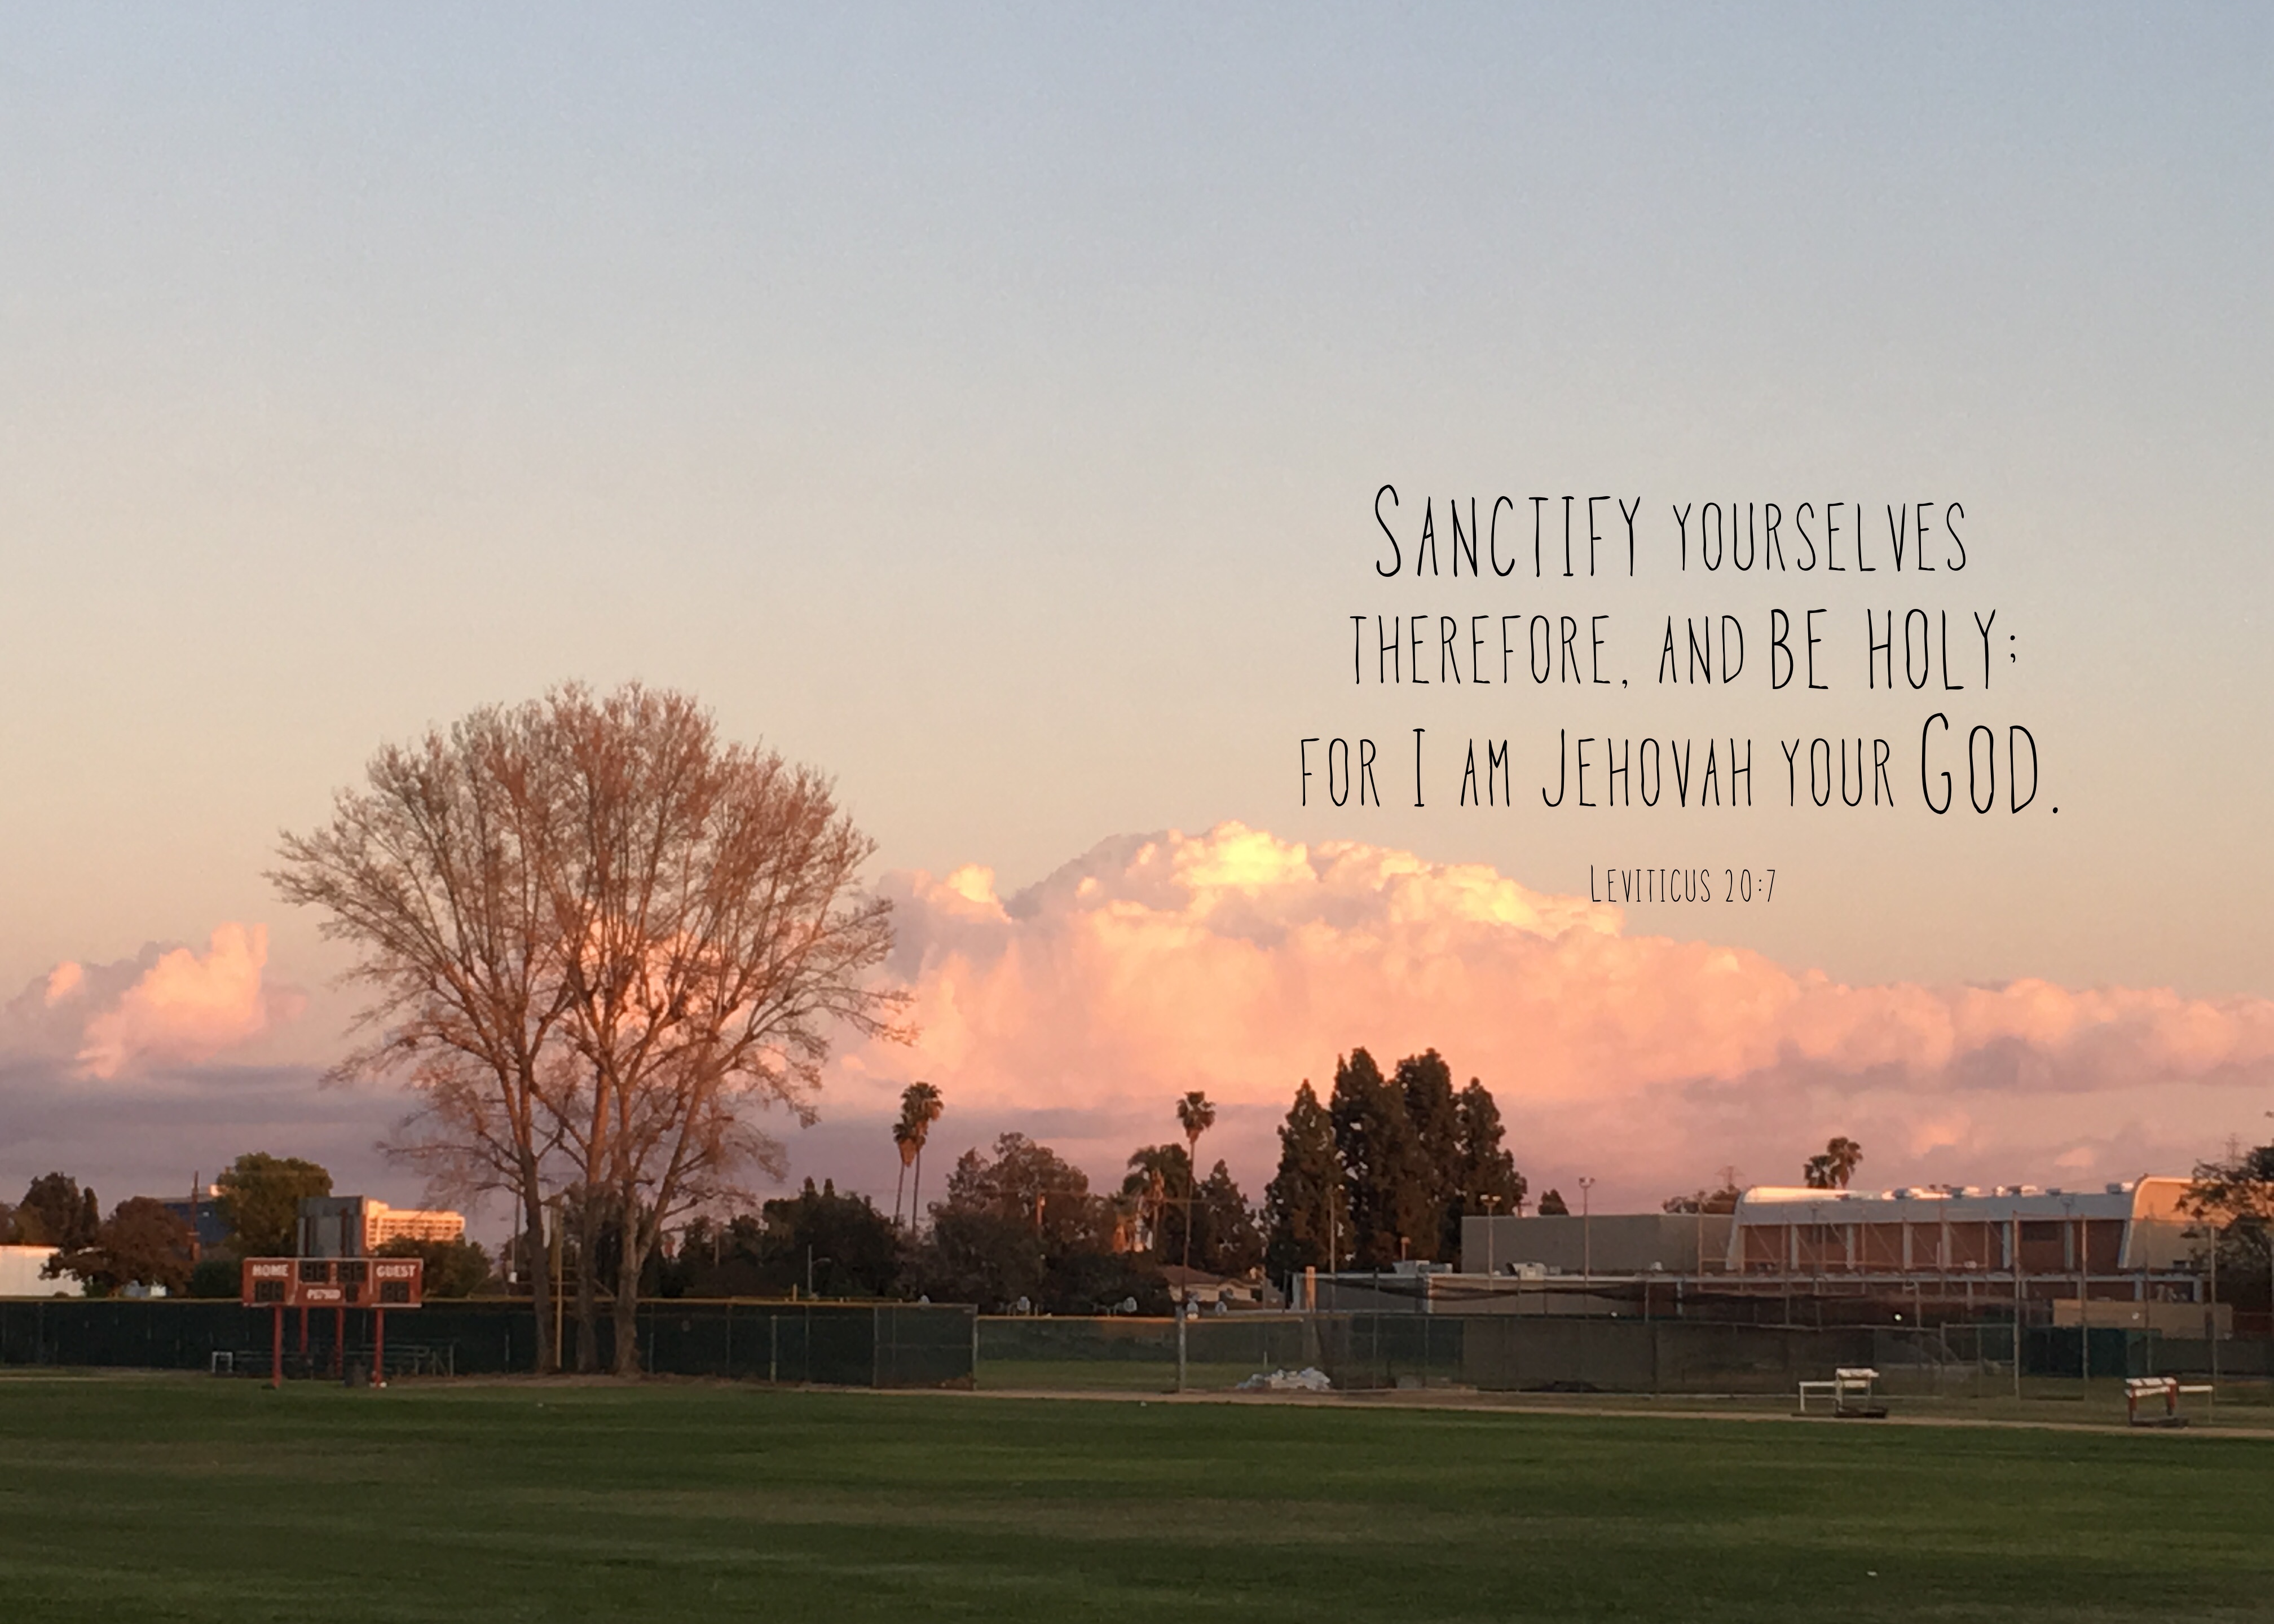 Lev. 20:7 Sanctify yourselves therefore, and be holy; for I am Jehovah your God.